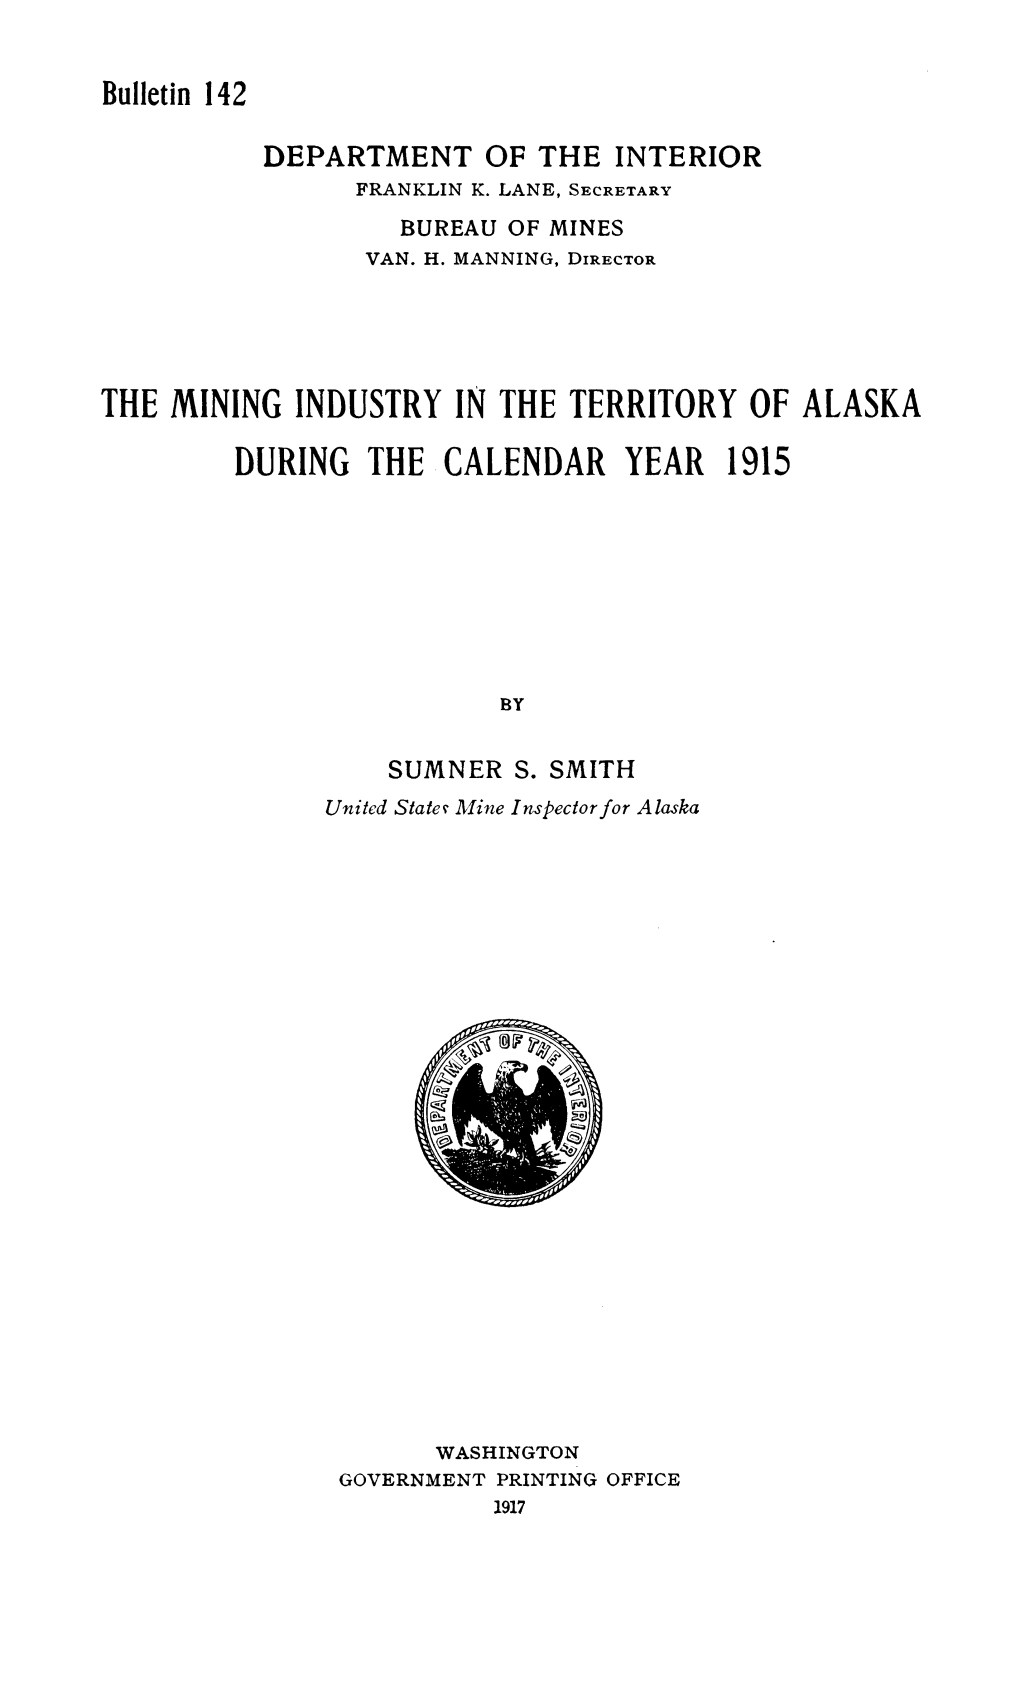 The Mining Industry in the Territory of Alaska During the Calendar Yar 1915